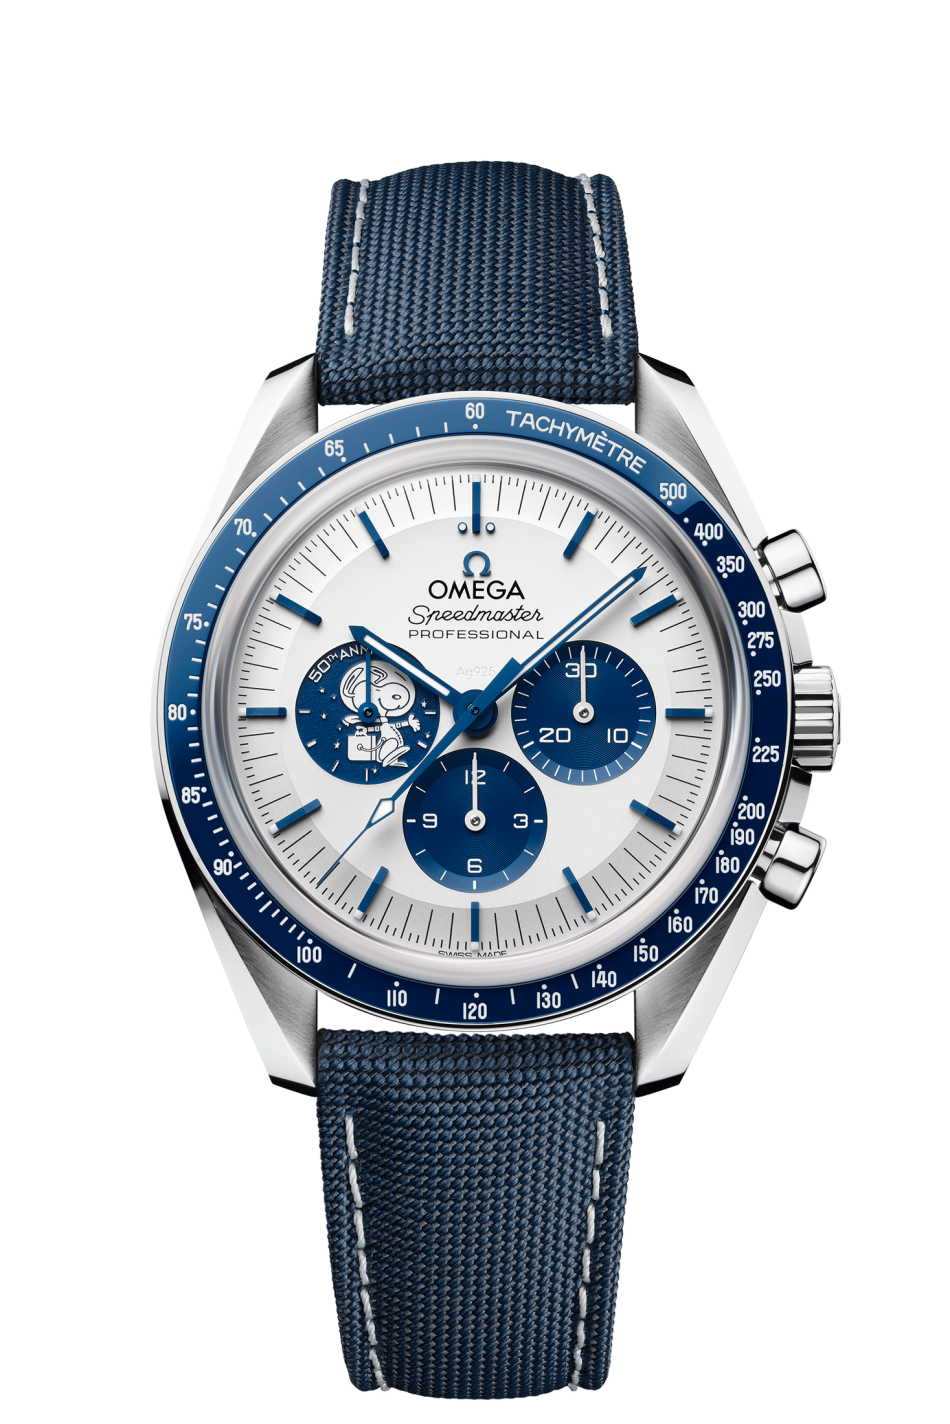 omega-speedmaster-moonwatch-31032425002001-1-product-zoom.png